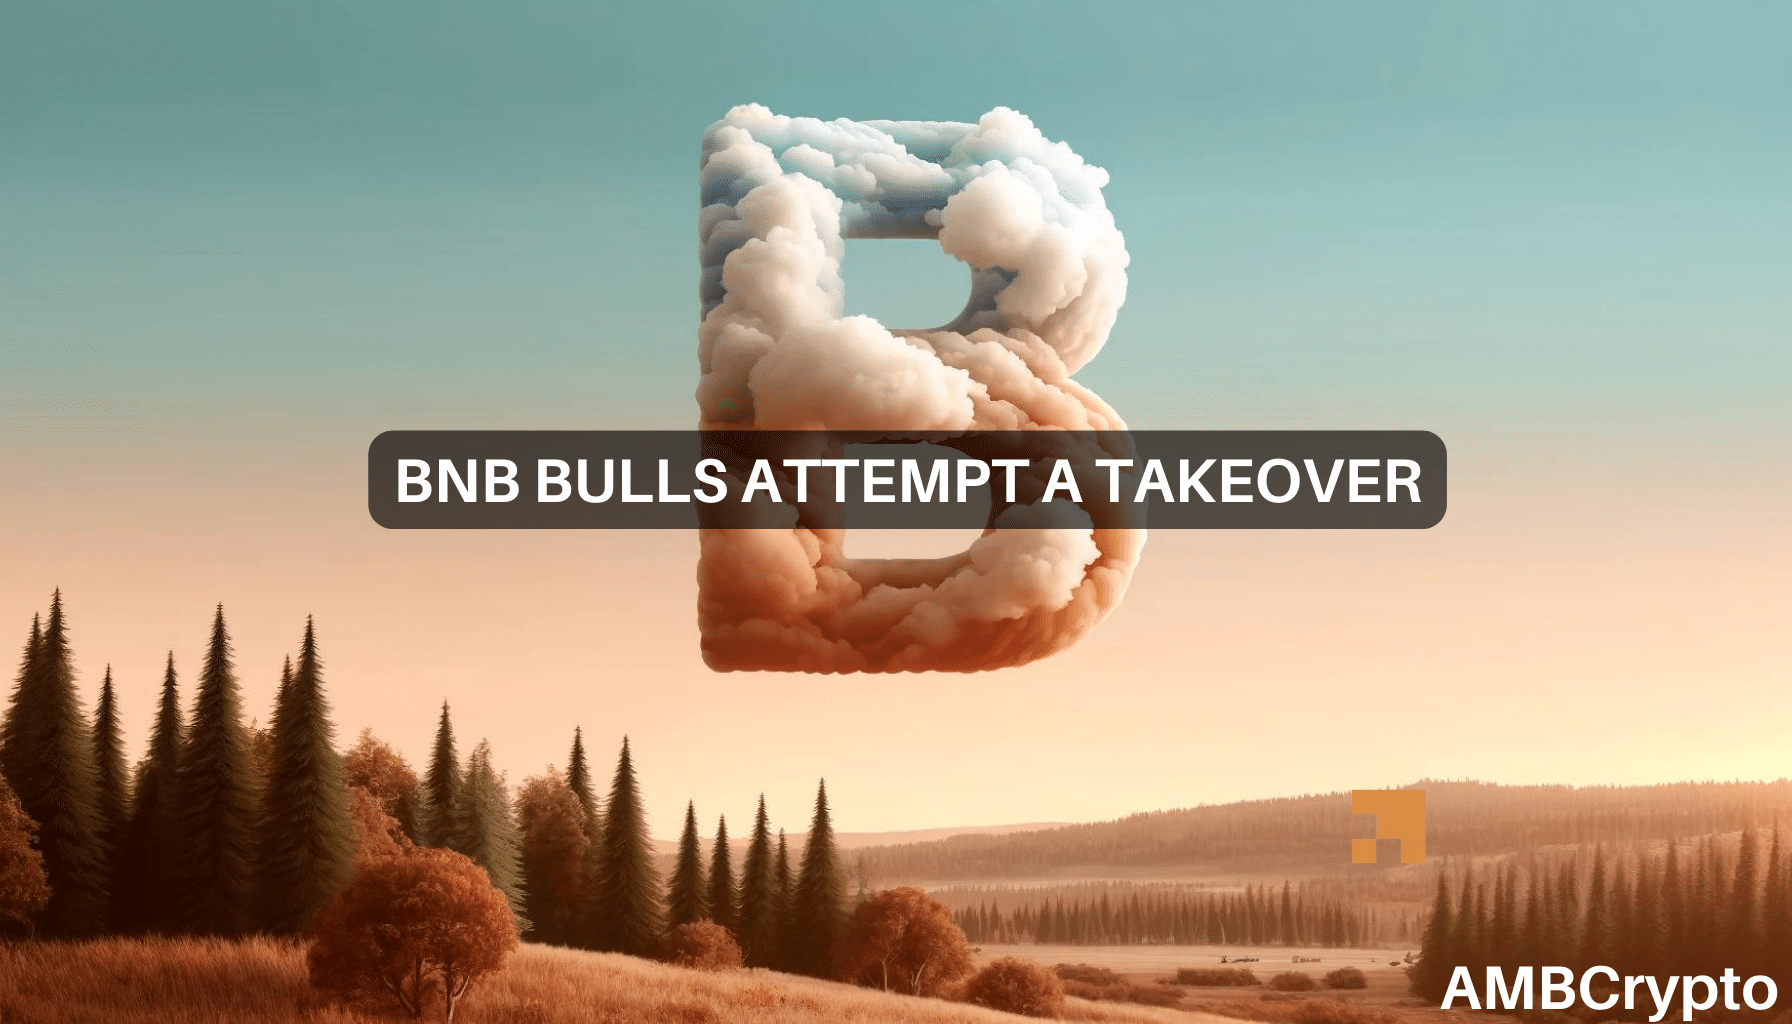 Does BNB’s breakout signal a change in trend?